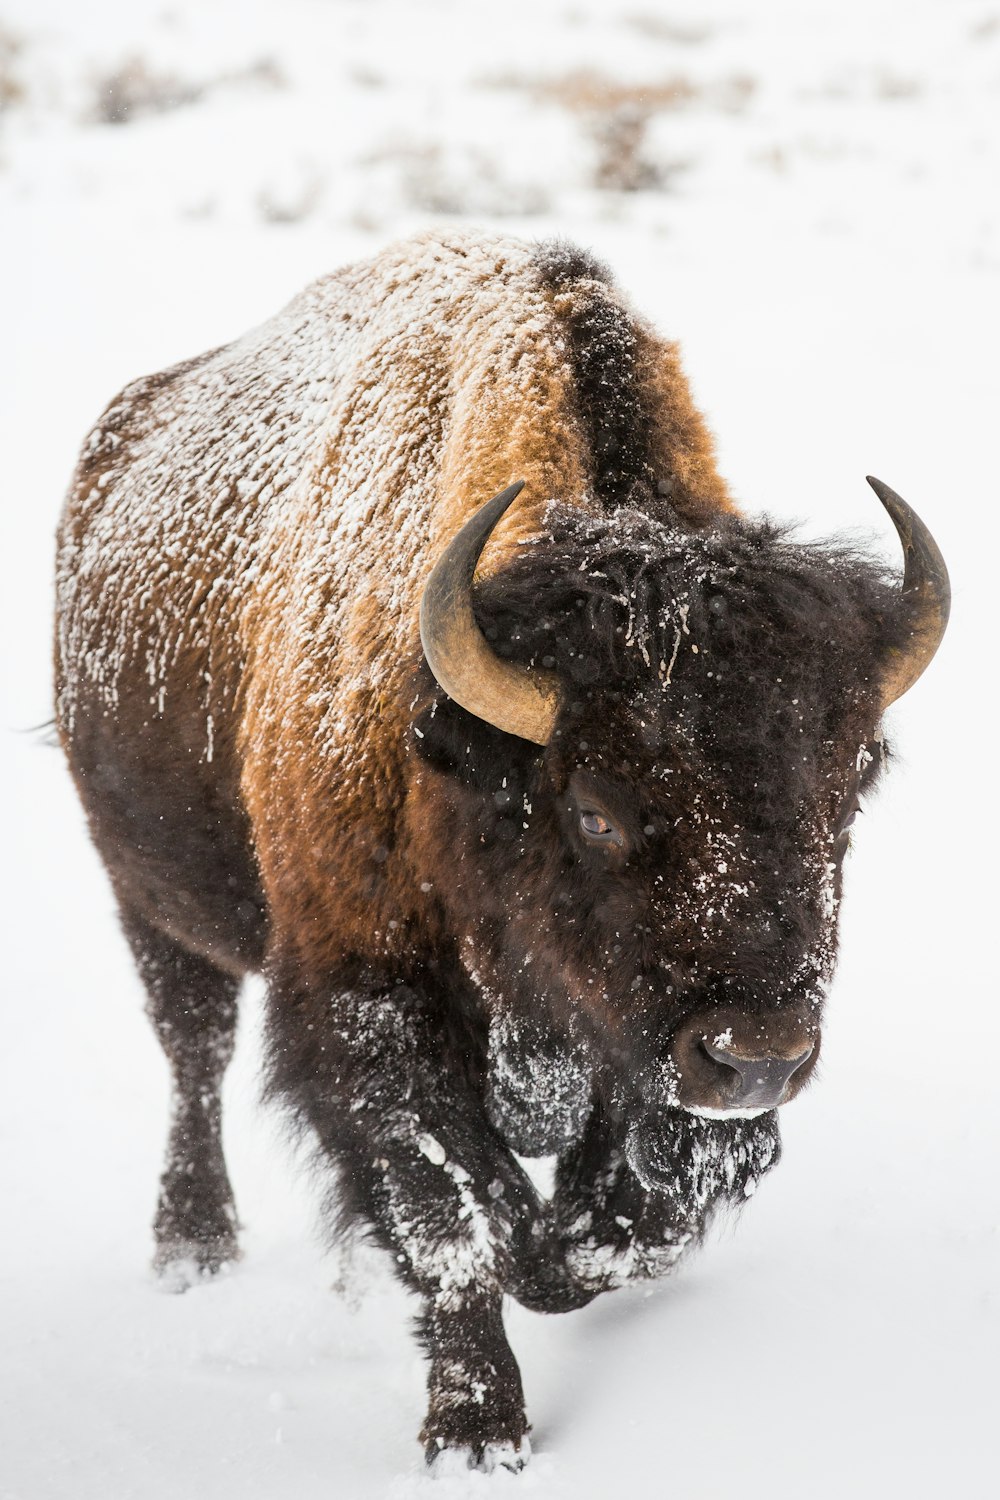 brown bison on white snow covered ground during daytime